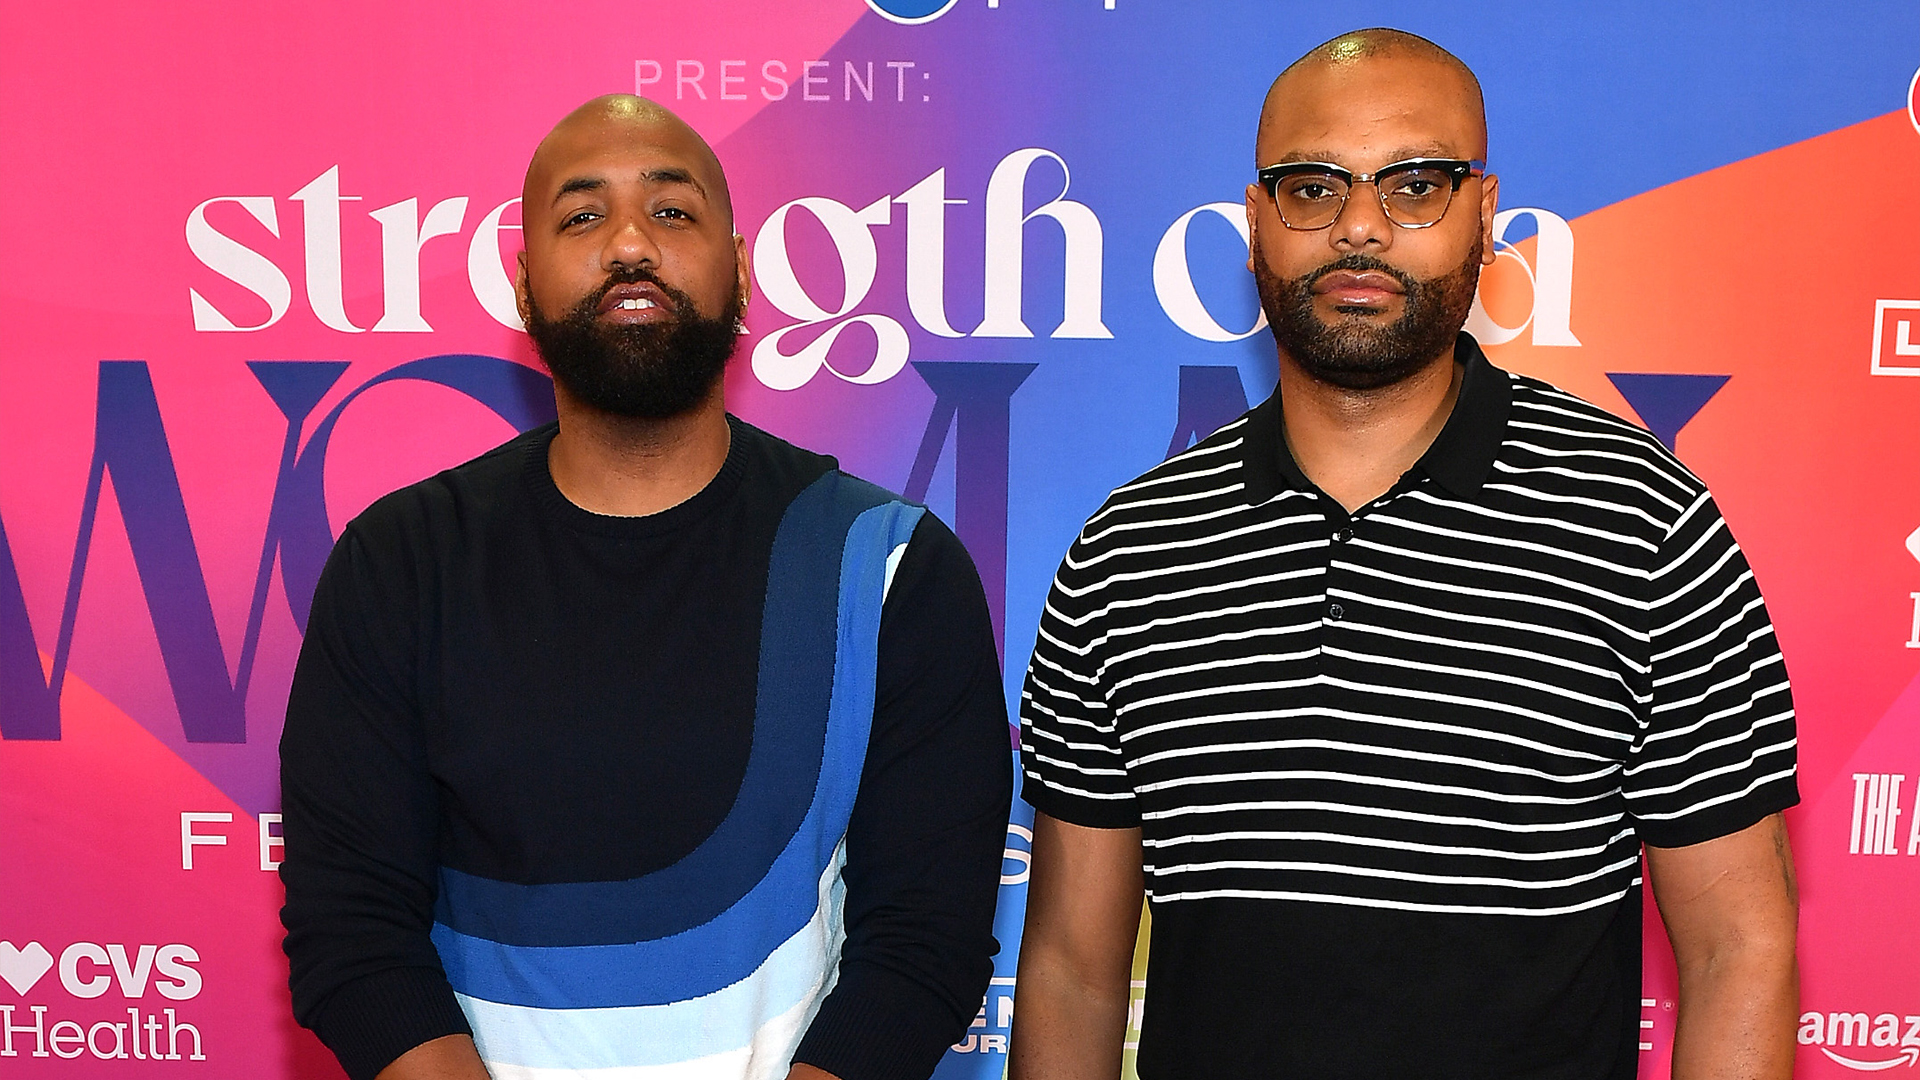 Rashad Bilal And Troy Millings Have Developed A Financial Literacy Curriculum That's Set To Rollout Across 10 Public Schools In The Bronx